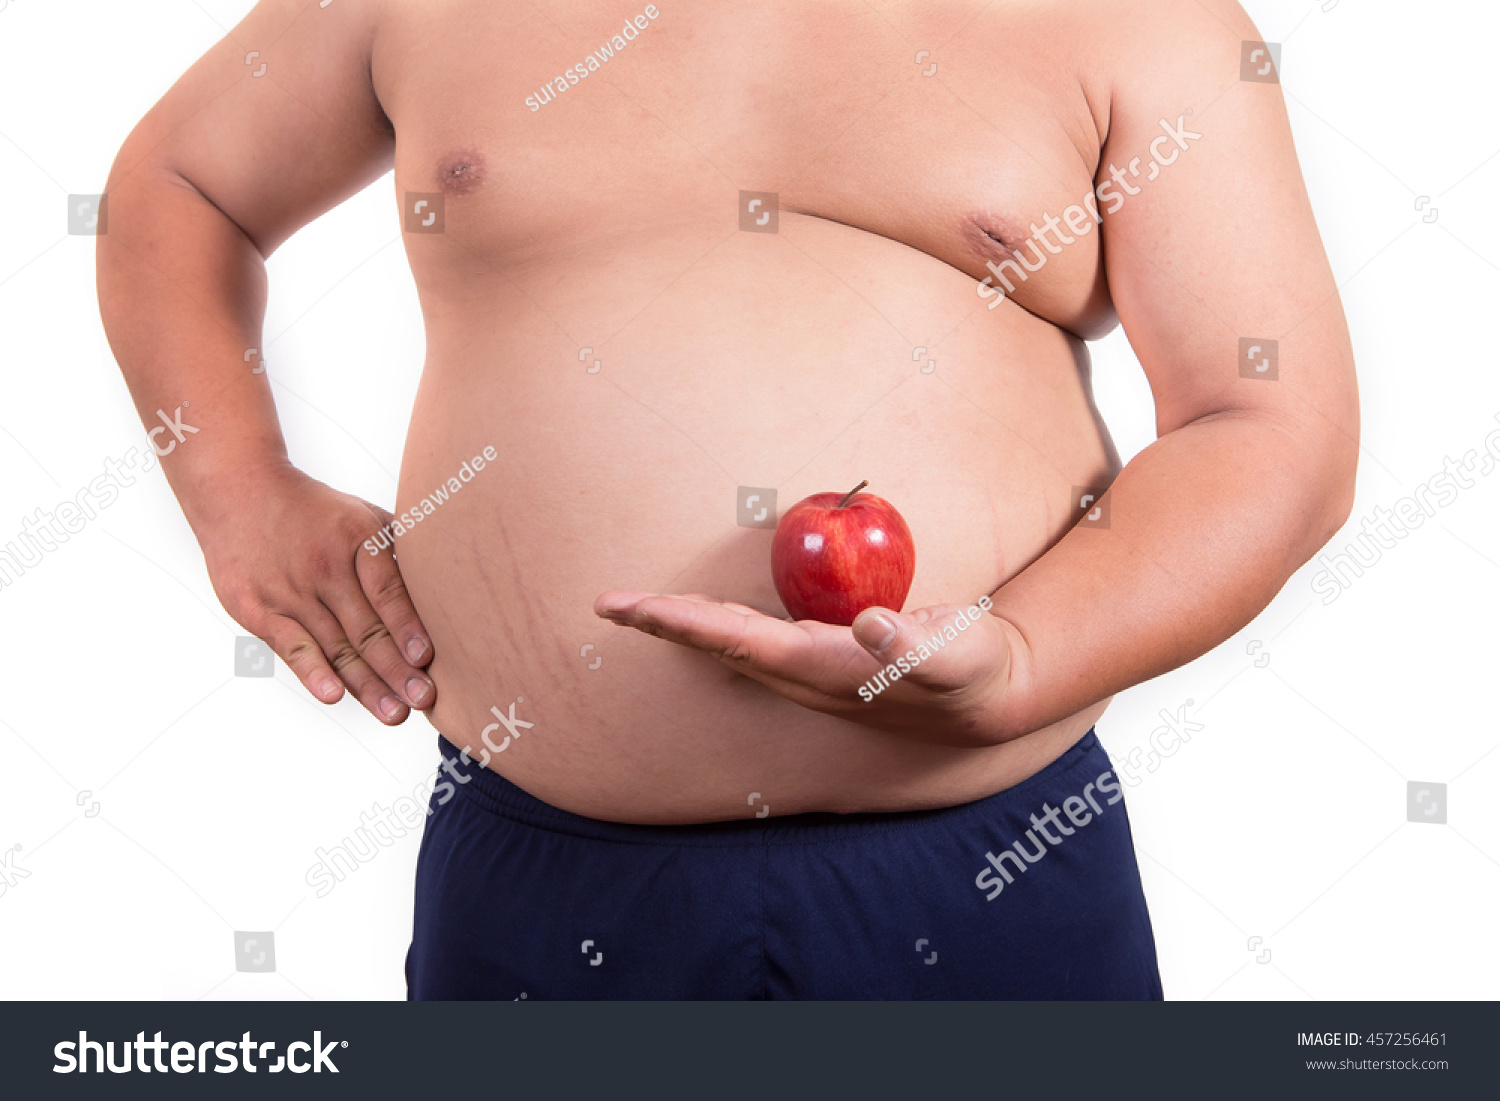 fat man with a apple in his hand. concept of healthy #457256461